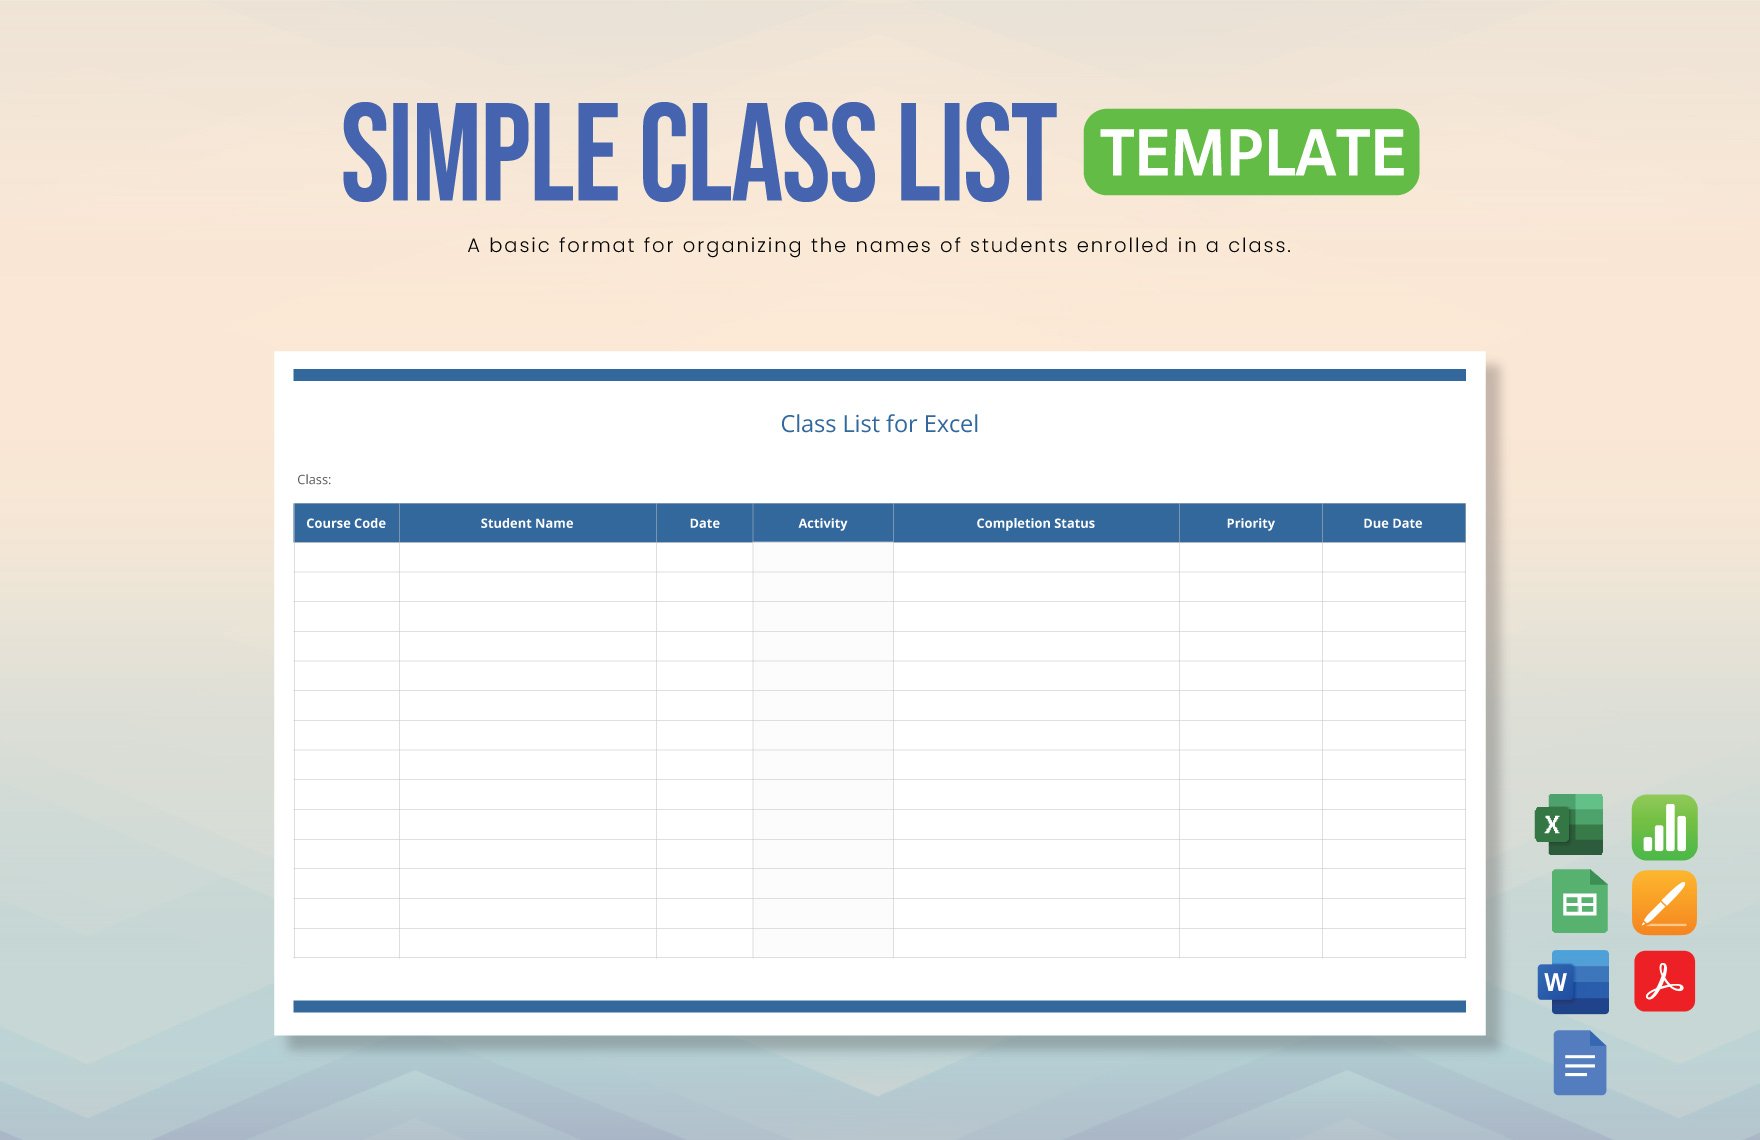 Free Simple Class List Template in Word, Google Docs, Excel, PDF, Google Sheets, Apple Pages, Apple Numbers